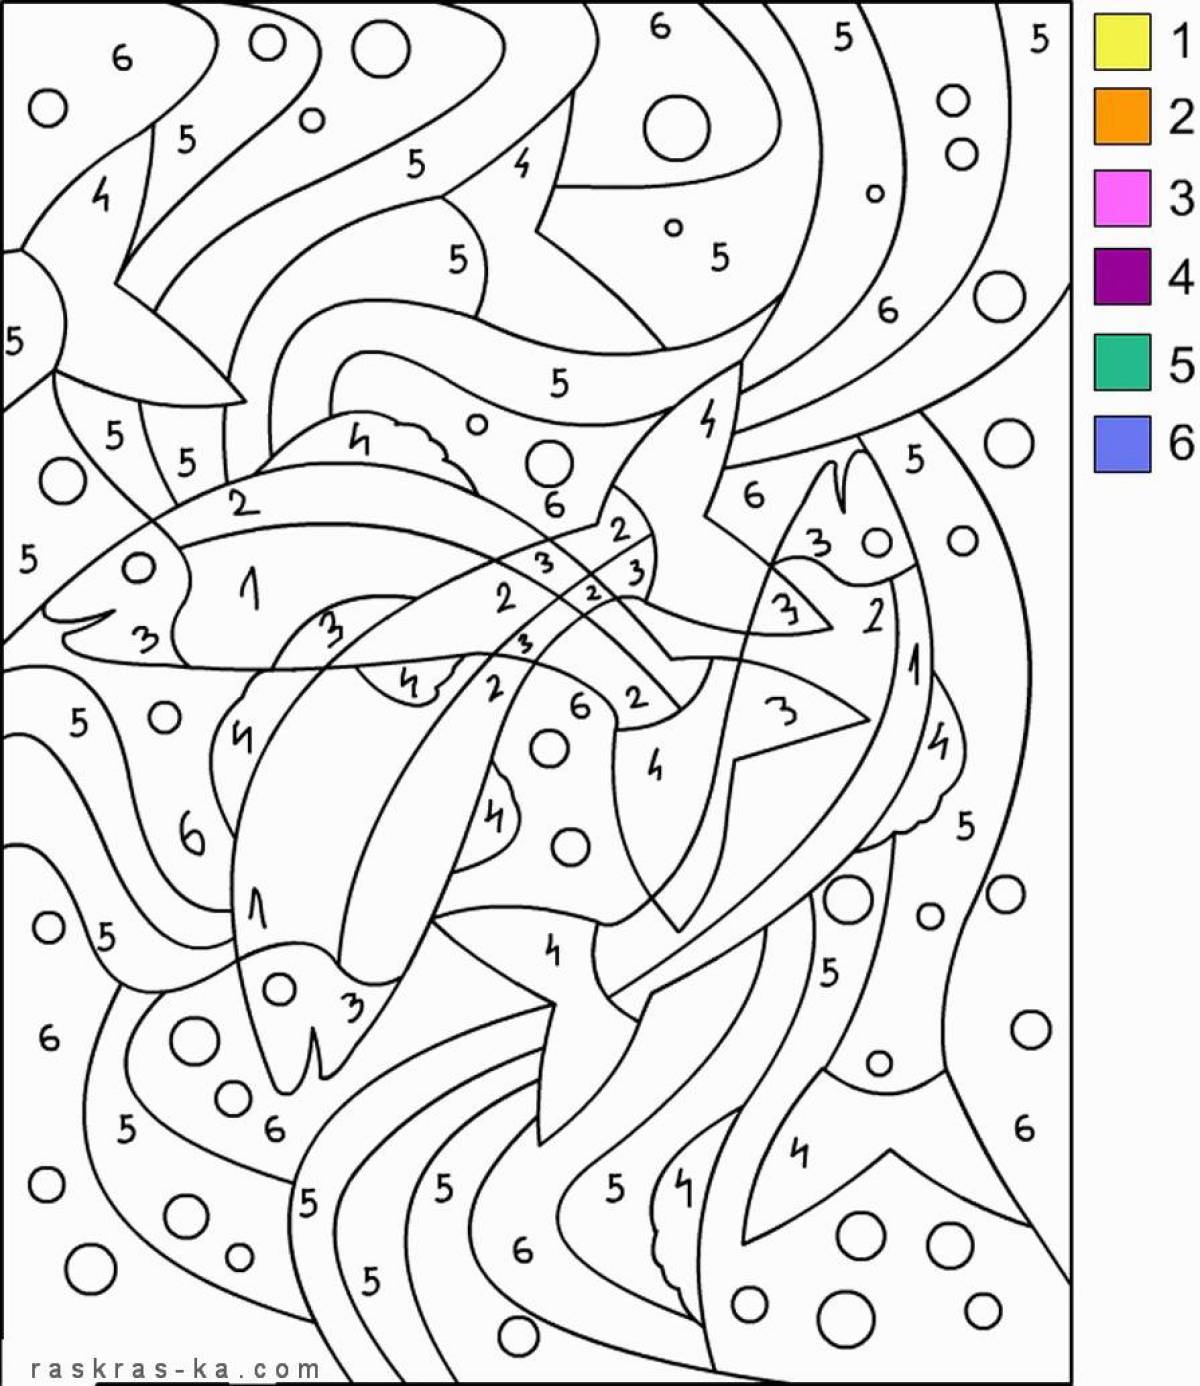 Creative coloring by numbers for 7-8 year olds